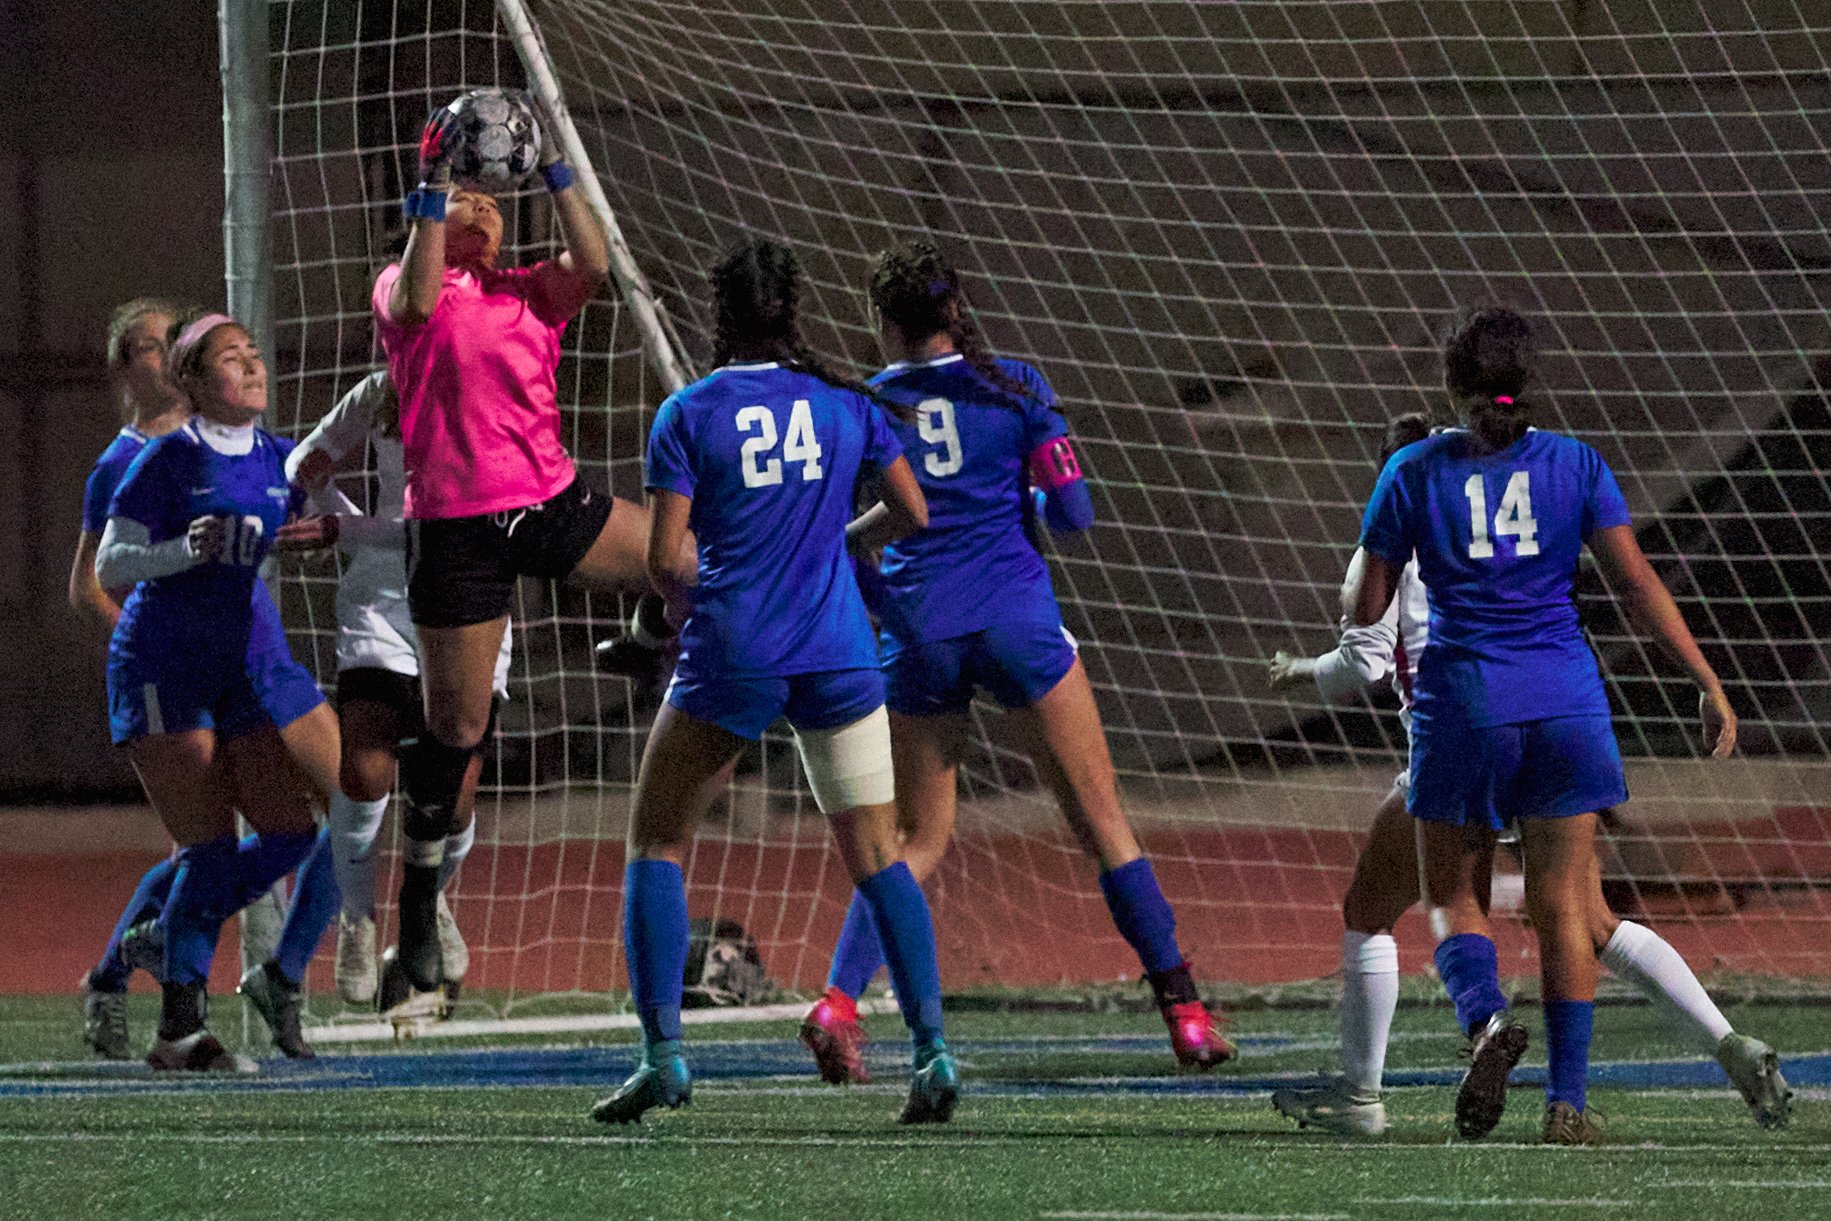  Santa Monica College Corsairs' goalie Johana Ventureno (in pink) saves the ball during the women's soccer match against the Bakersfield College Renegades on Wednesday, Nov. 16, 2022, at Corsair Field in Santa Monica, Calif. The Corsairs won 1-0. (Ni